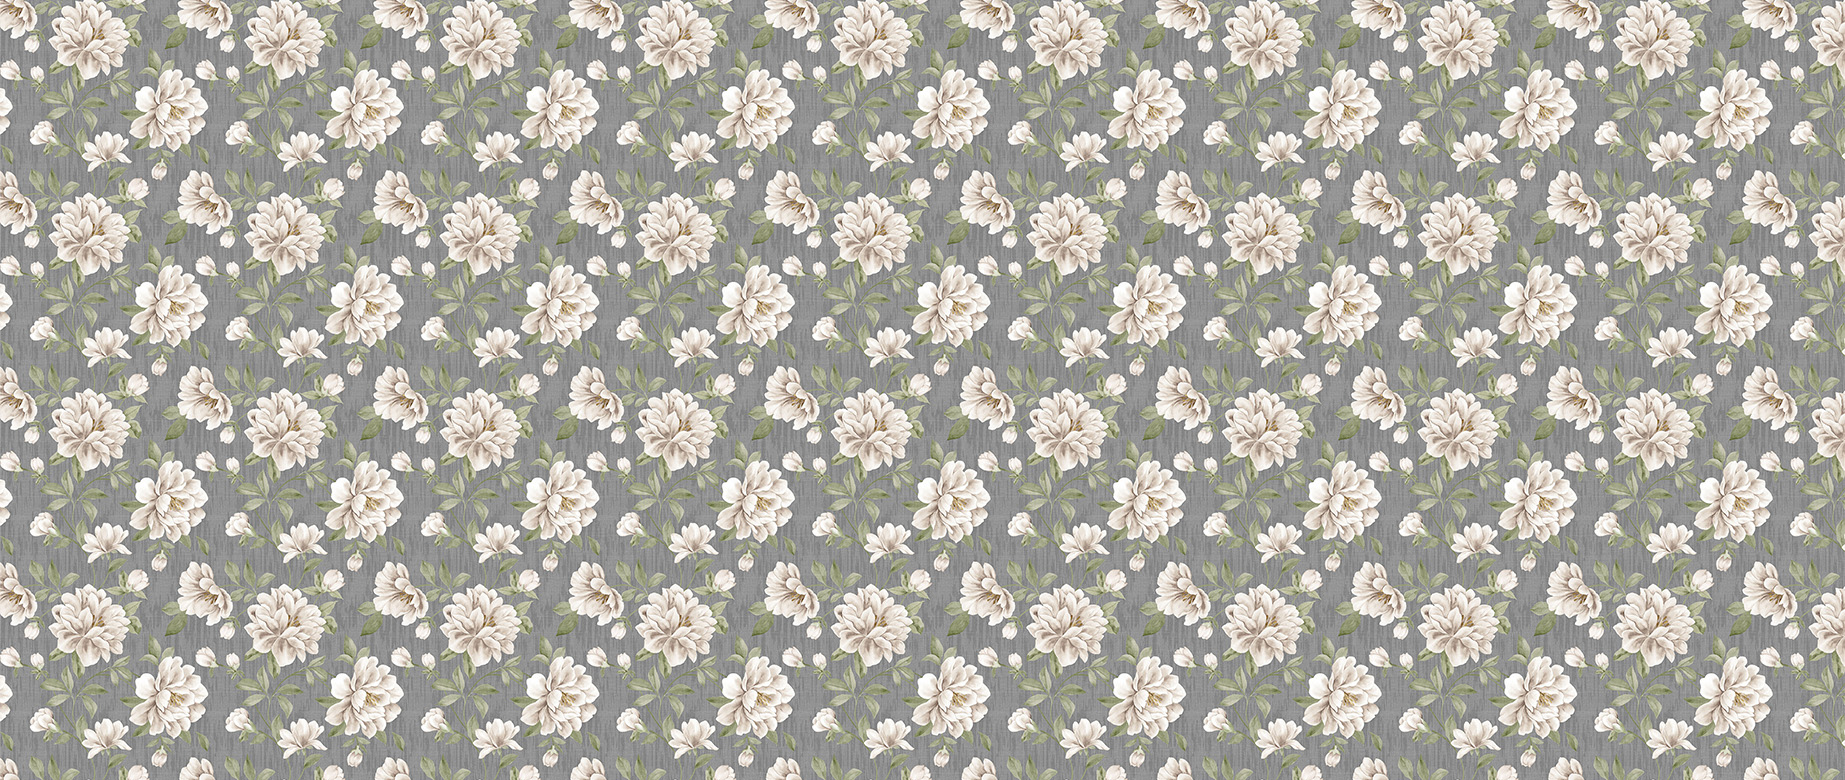 floral-patter-with-fabric-design-wallpapers-full-wide-view